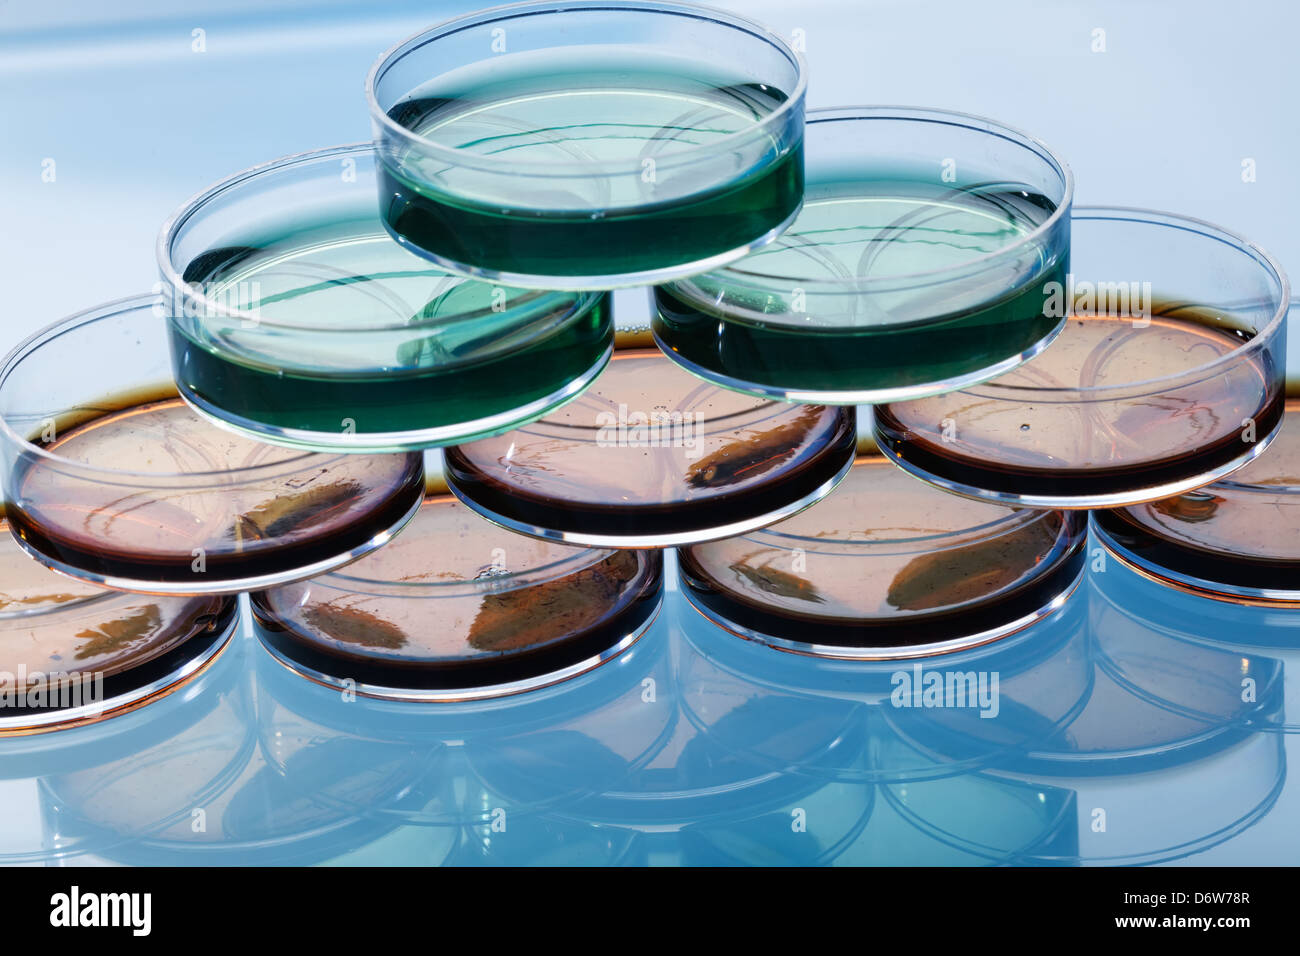 Petri dish with colonies of pathogenic bacteria Stock Photo